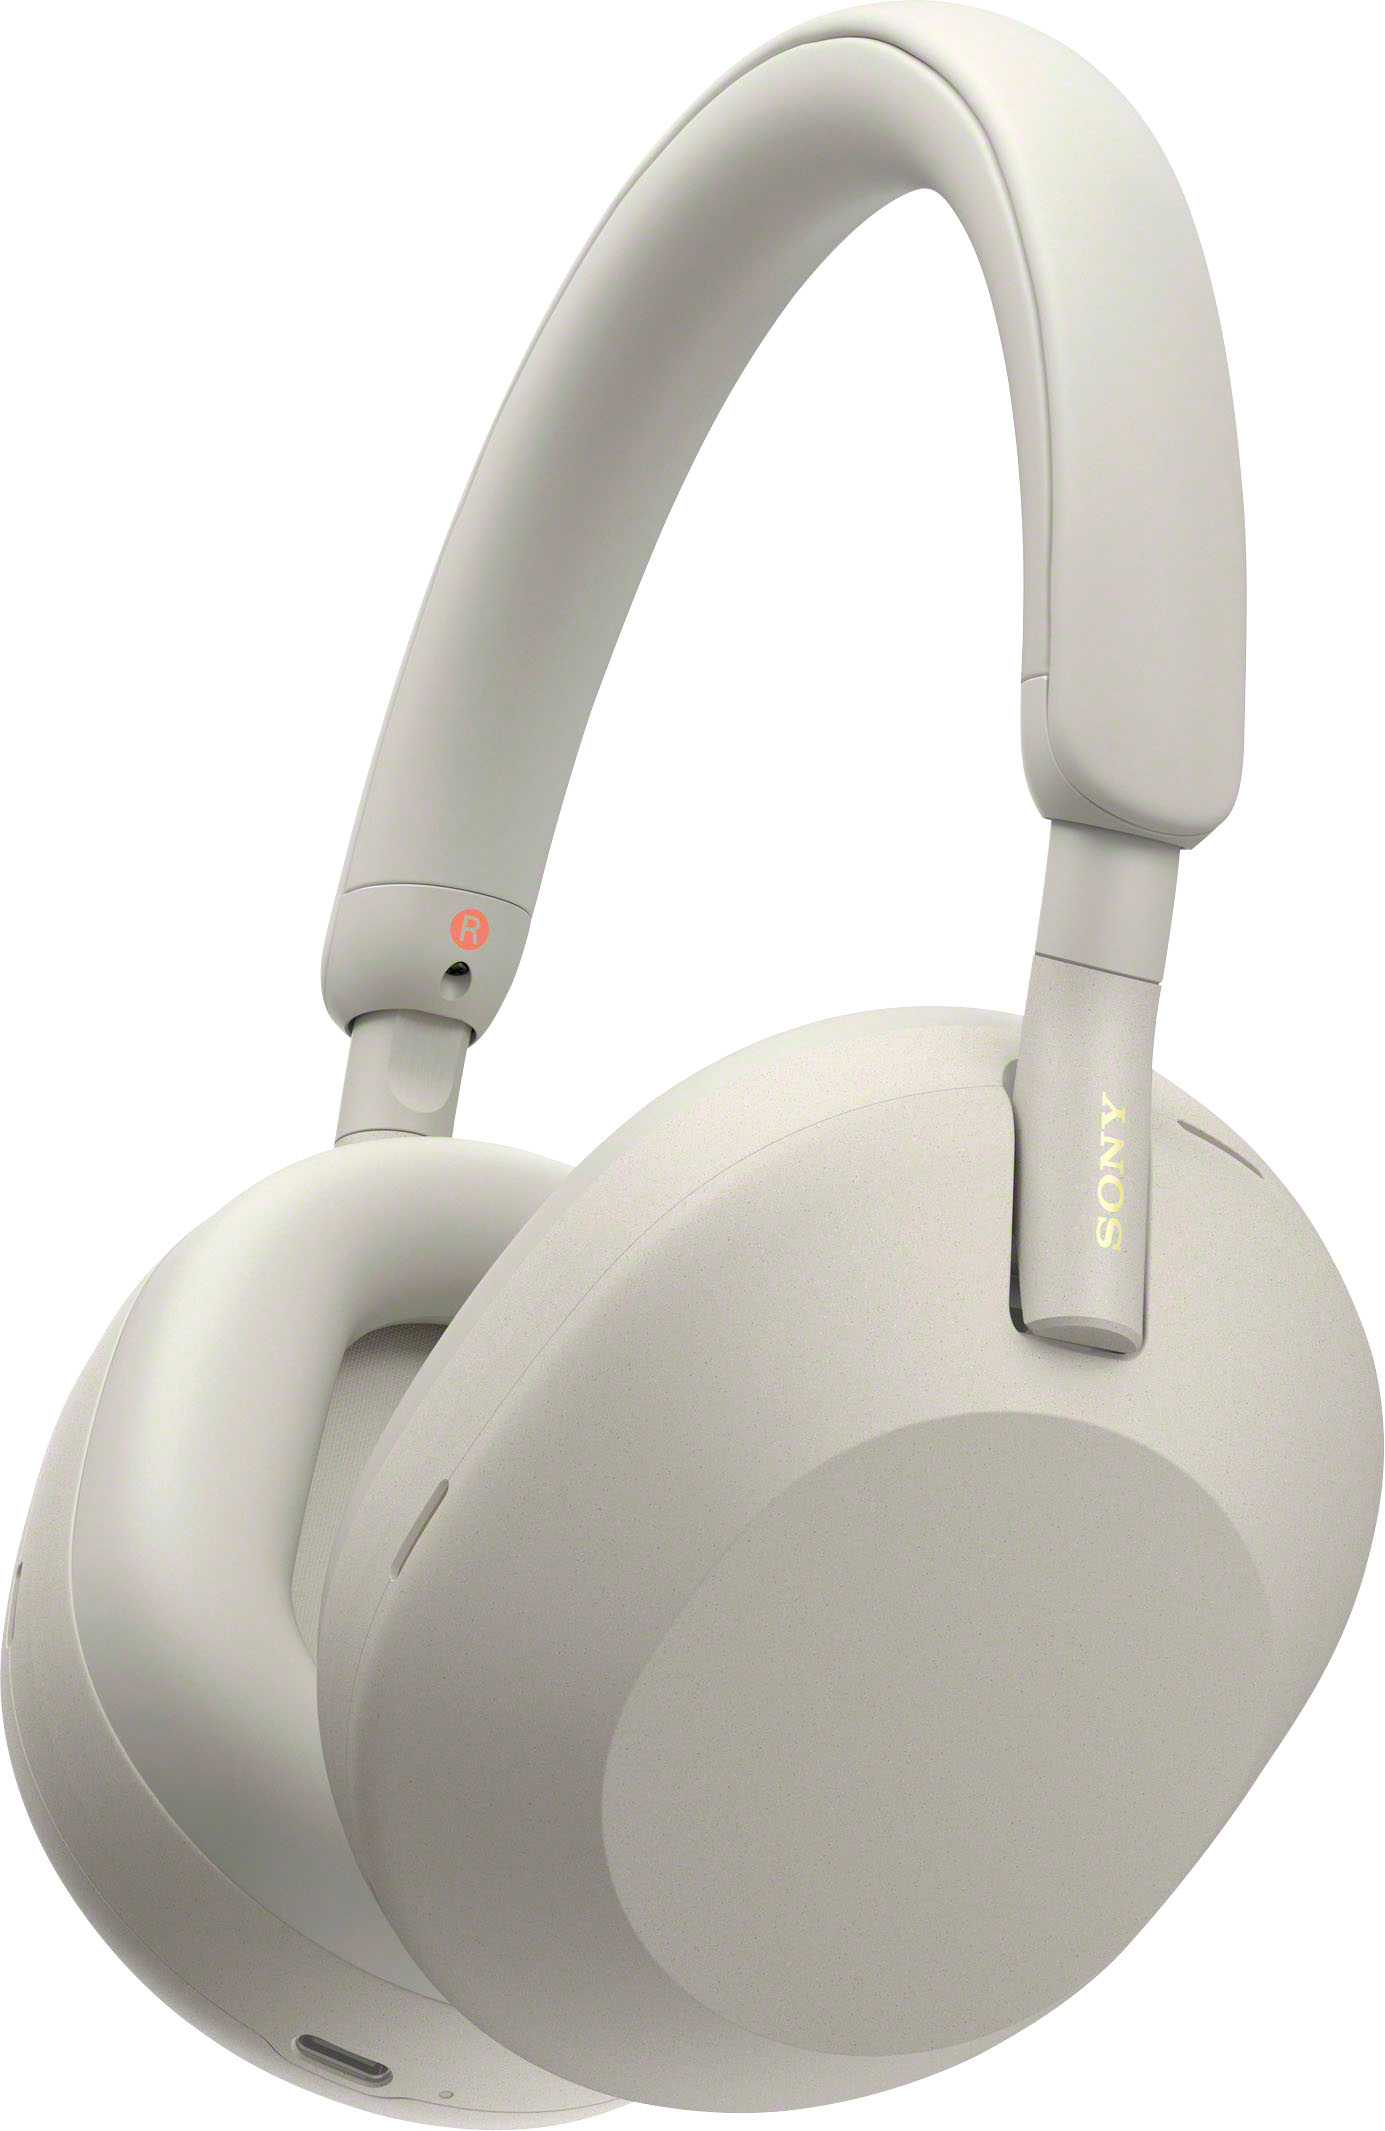 Sony WH-1000XM5 Wireless Noise-Canceling Over-the-Ear